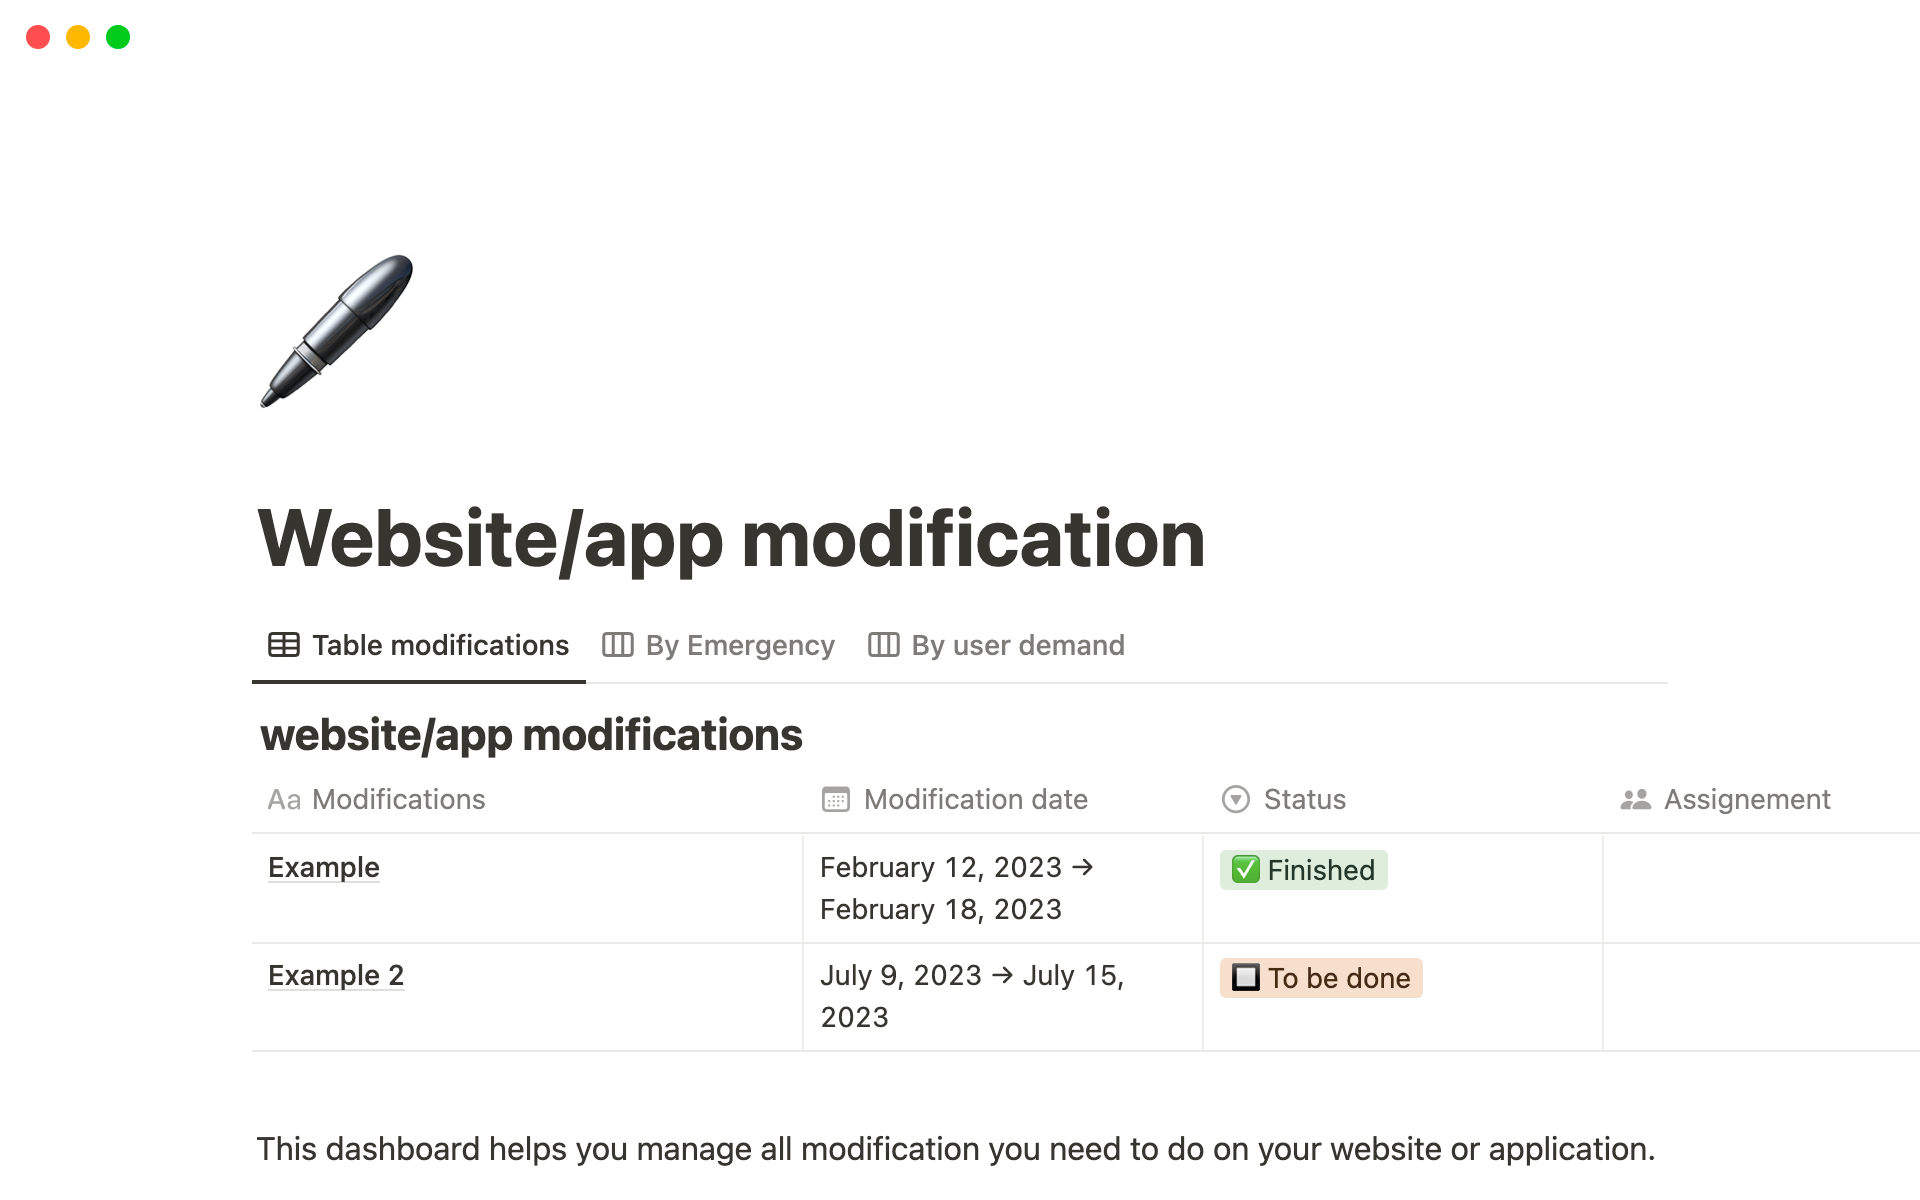 This template will help you manage your website/app modifications based on user demand and emergency